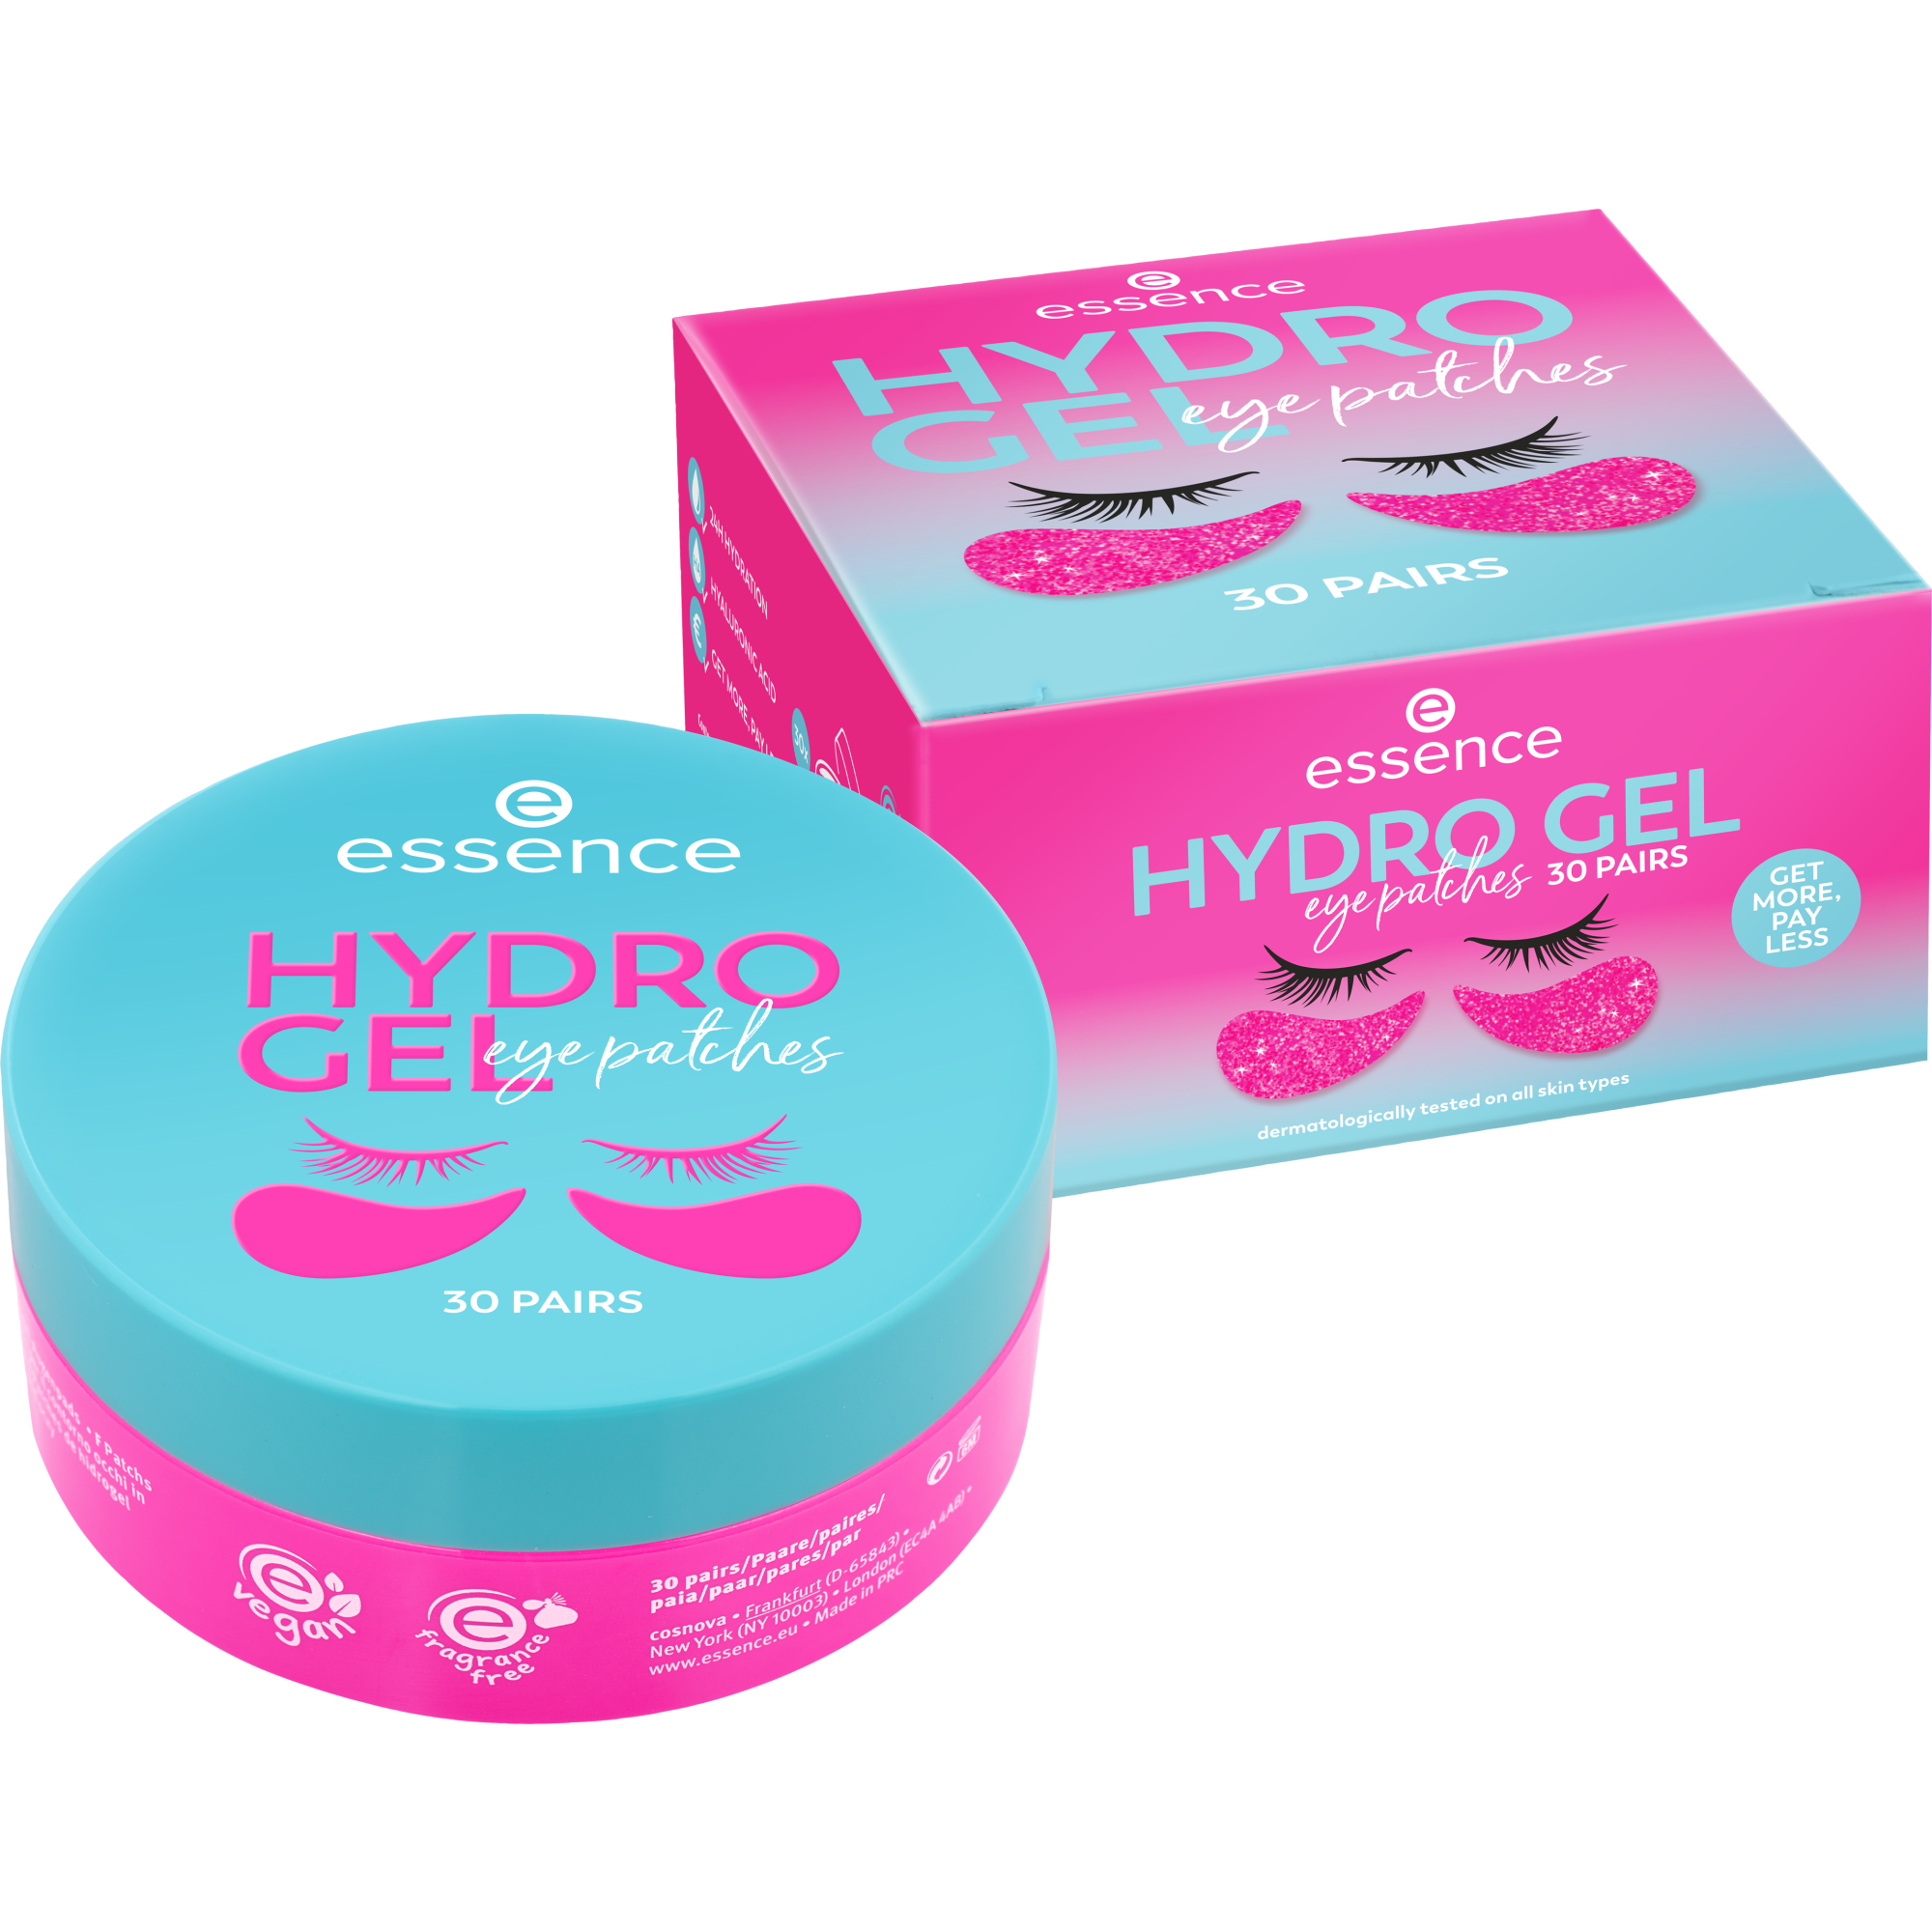 HYDRO GEL eye patches 30 PAIRS patchs yeux